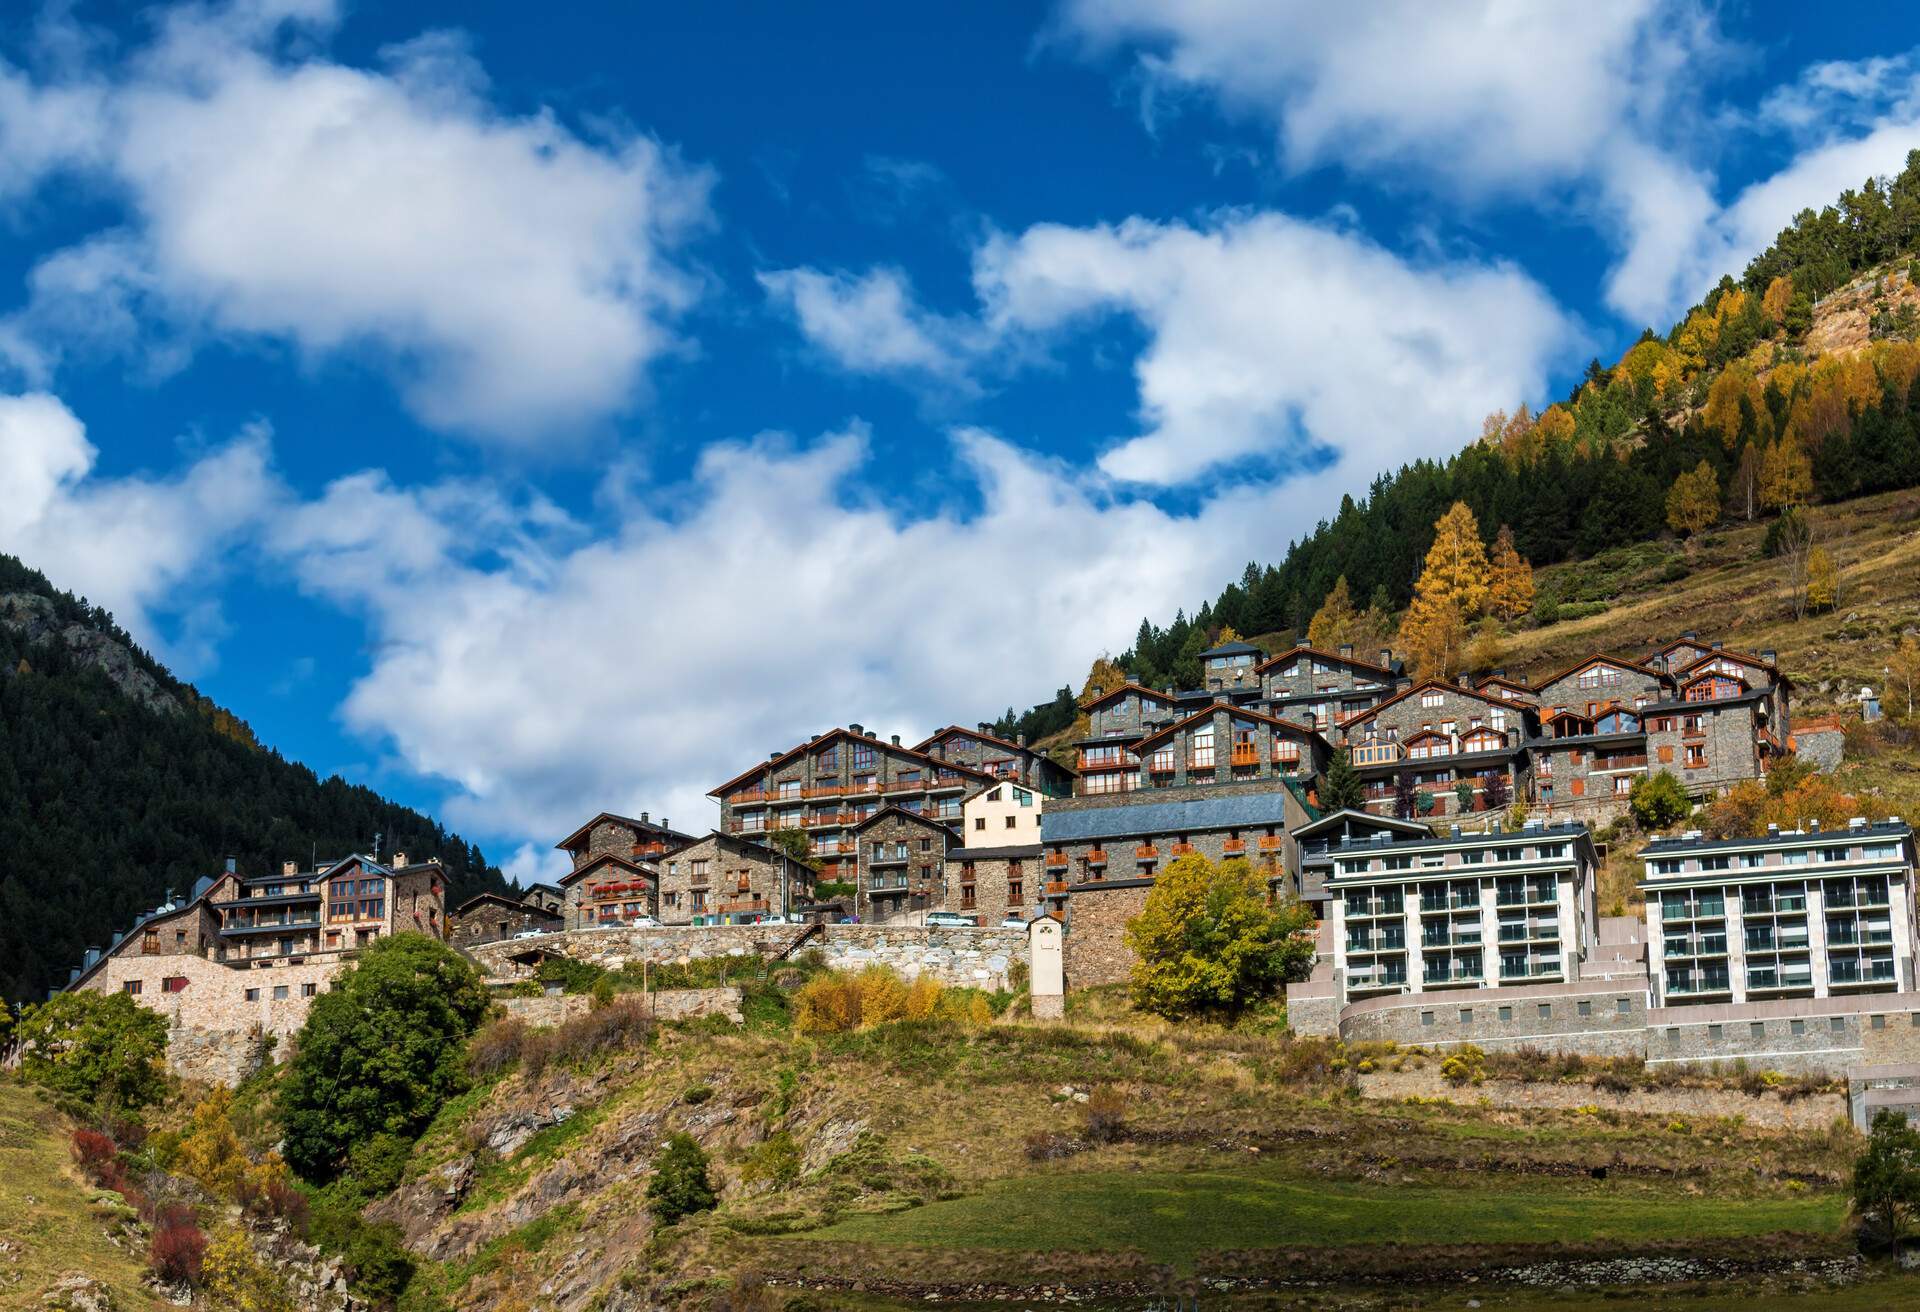 A town with multi-storey buildings that is situated on a hillside and is encircled by luxuriant flora.